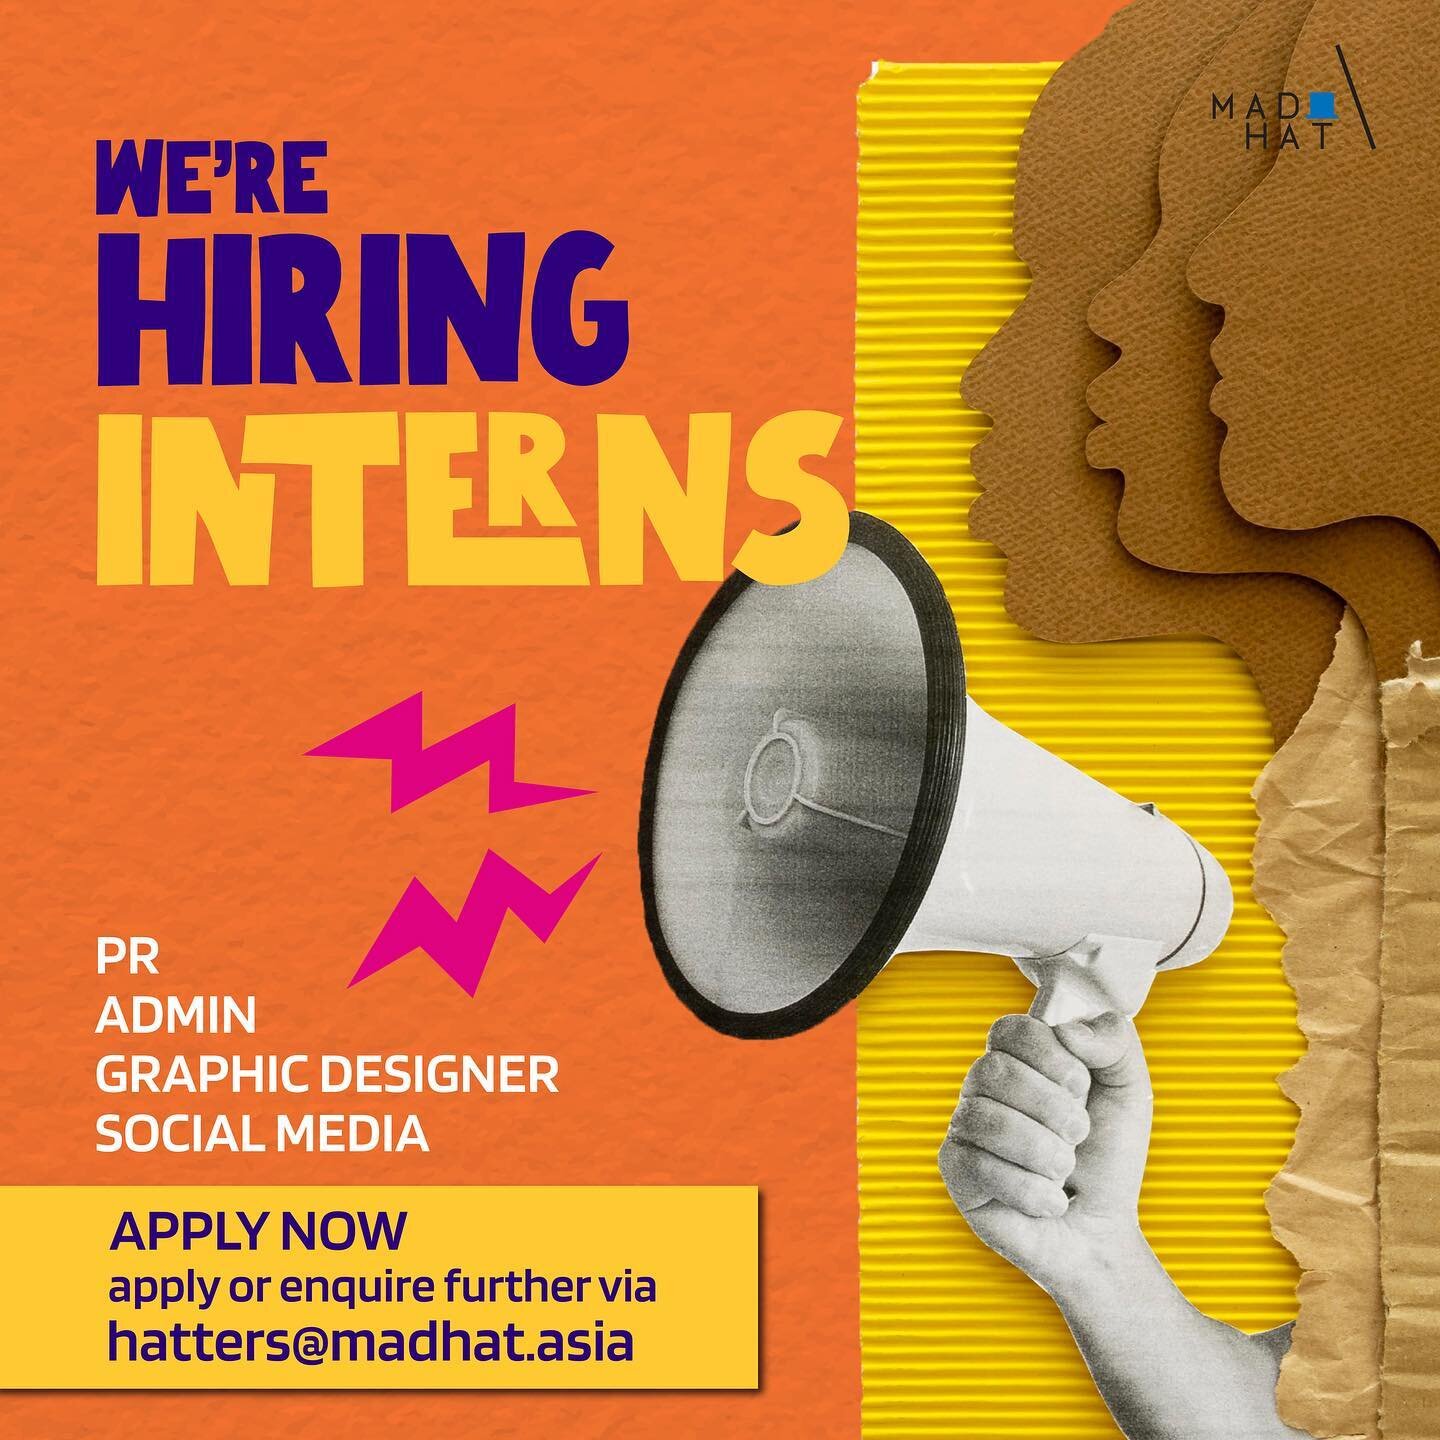 Calling all social butterflies, PR enthusiasts and/or creatives! Looking to work with a team who&rsquo;s quirky and creative as you are?

Well, we&rsquo;re looking for you too! We&rsquo;re on the hunt for interns to join our eclectic &amp; just a lit